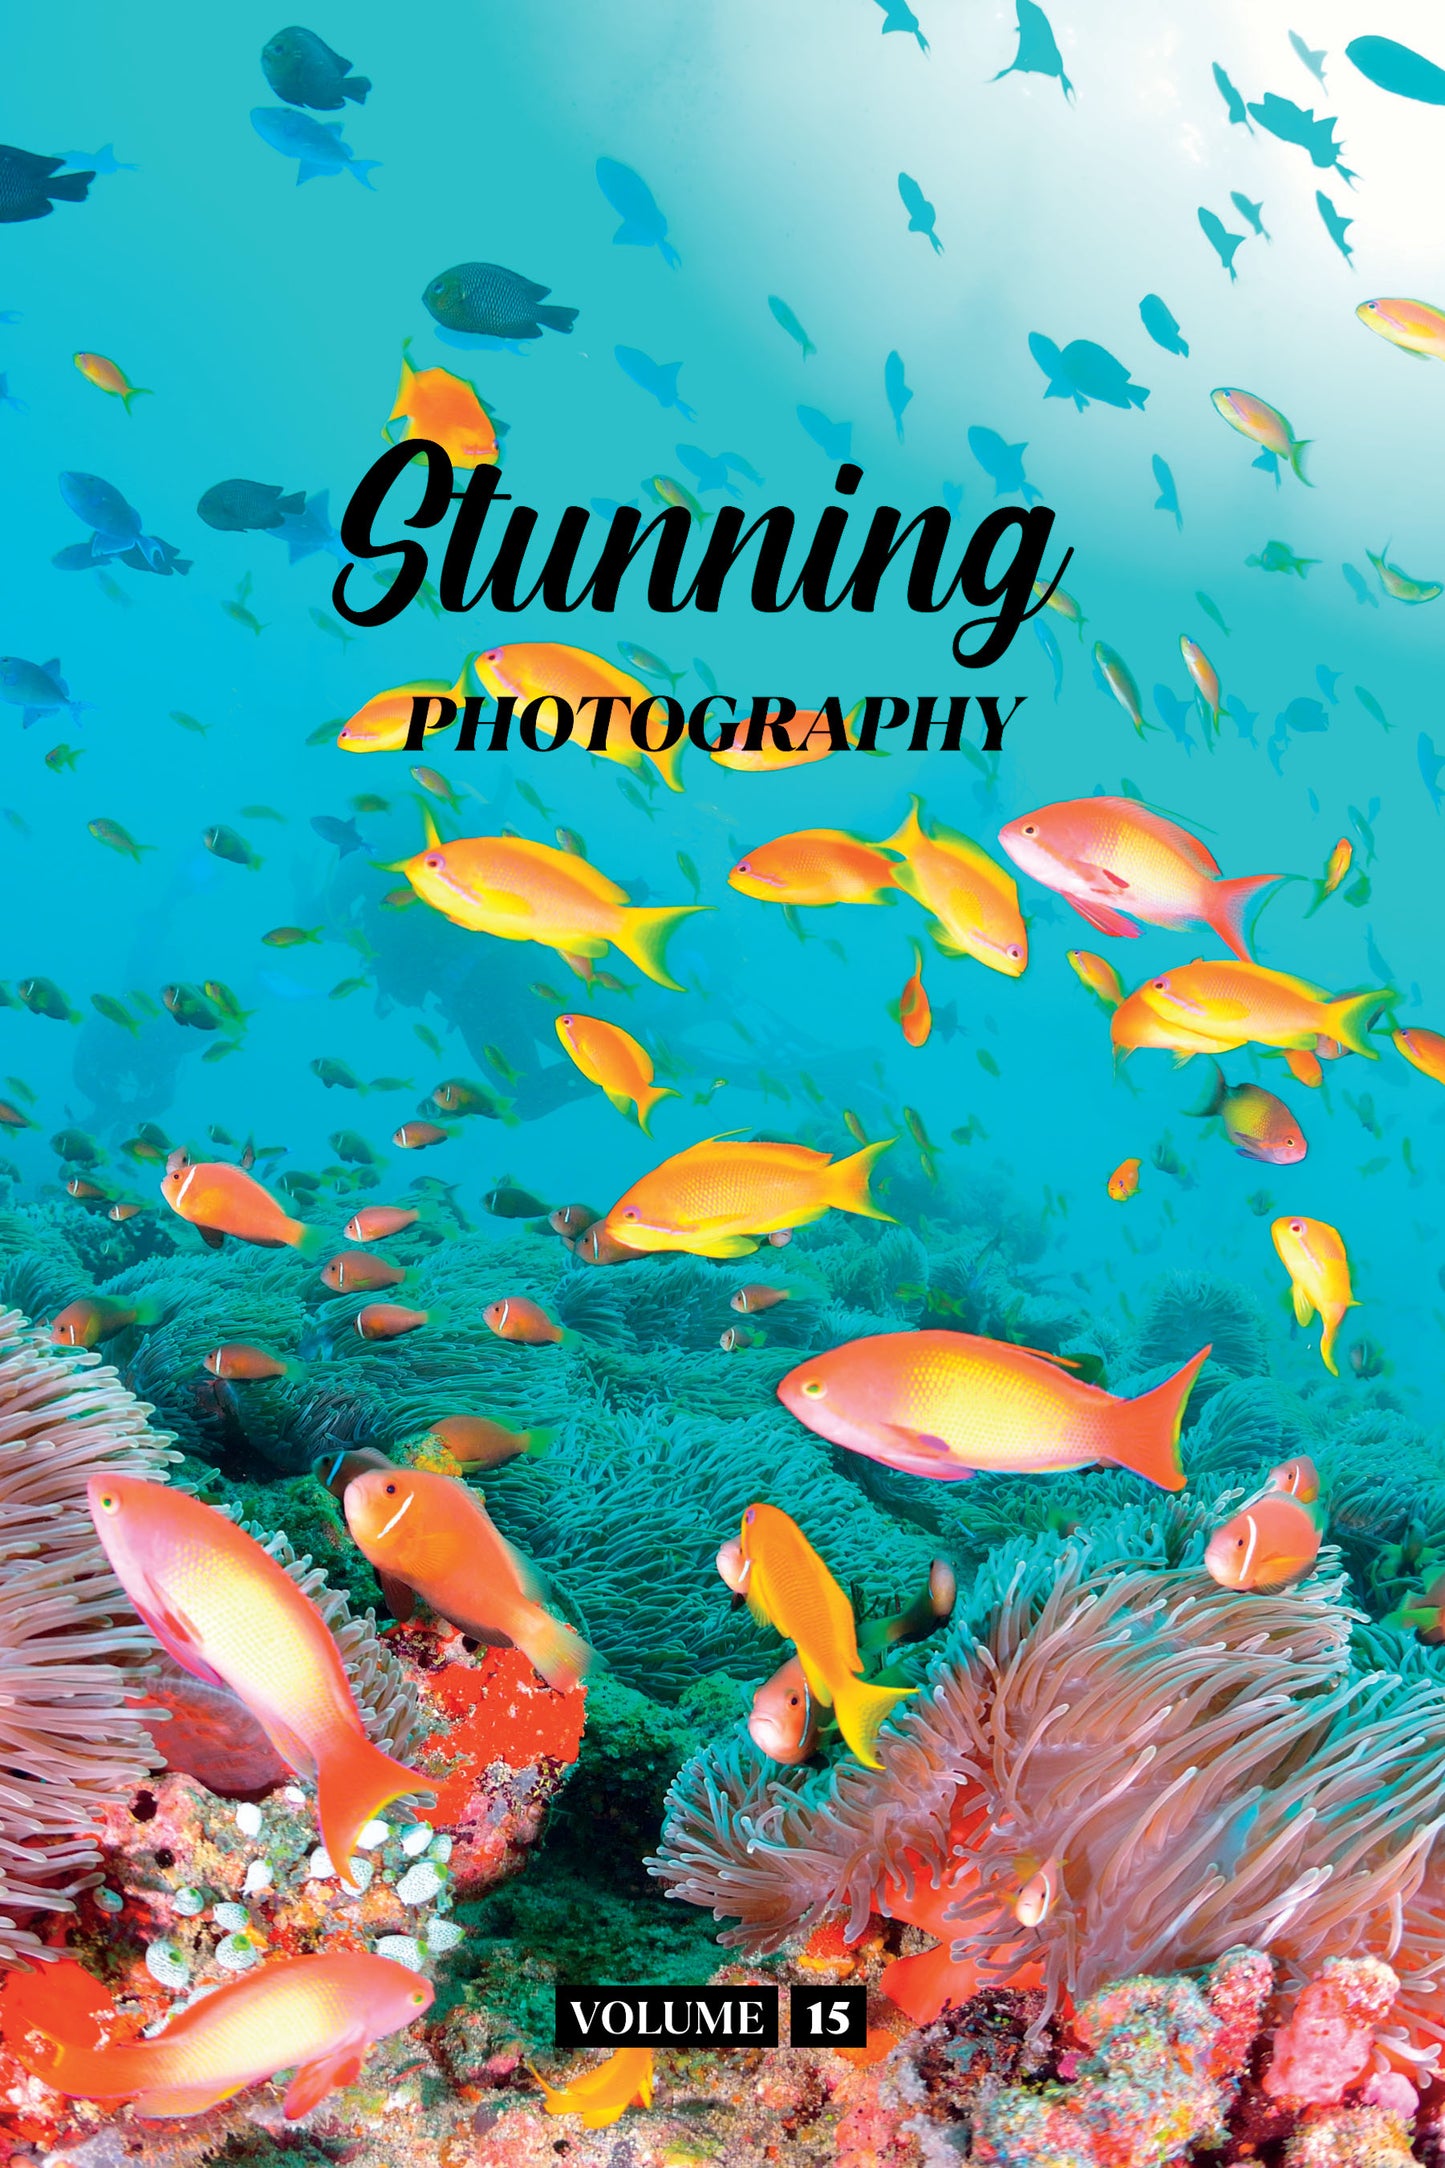 Stunning Photography Volume 15 (Physical Book)